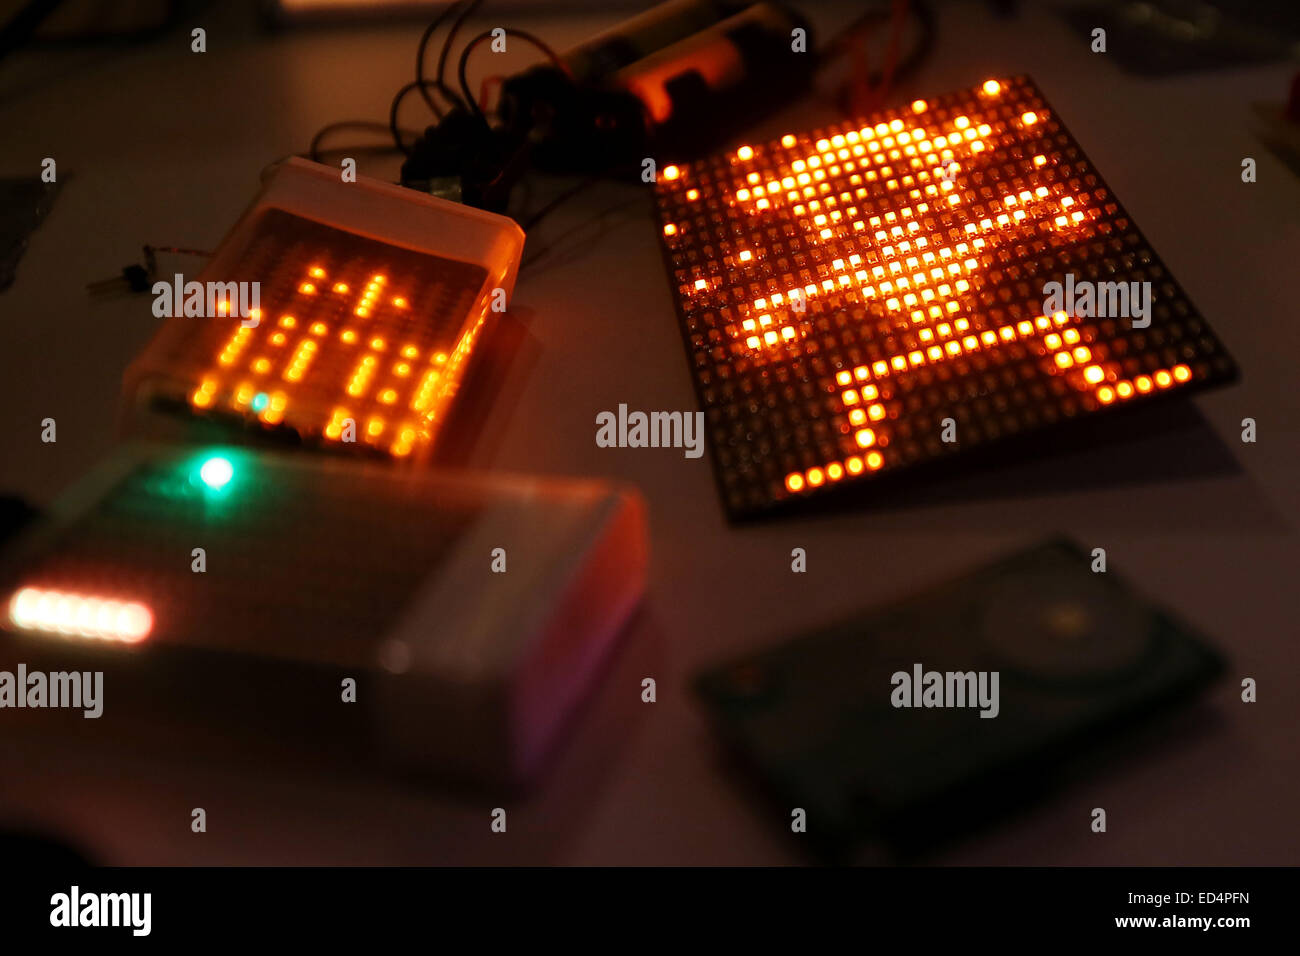 Hamburg, Germany, 27th Dec, 2014. Programmed displays lie on a table at the 31 Chaos Communication Congress in the Coongress Centre Hamburg, Germany, 27 December 2014. From 27 December 2014 to 30 December 2014 Europe's biggest hacker-scene meeting with the motto 'A new dawn' takes place in the hanseatic city. © dpa picture alliance/Alamy Live News Stock Photo